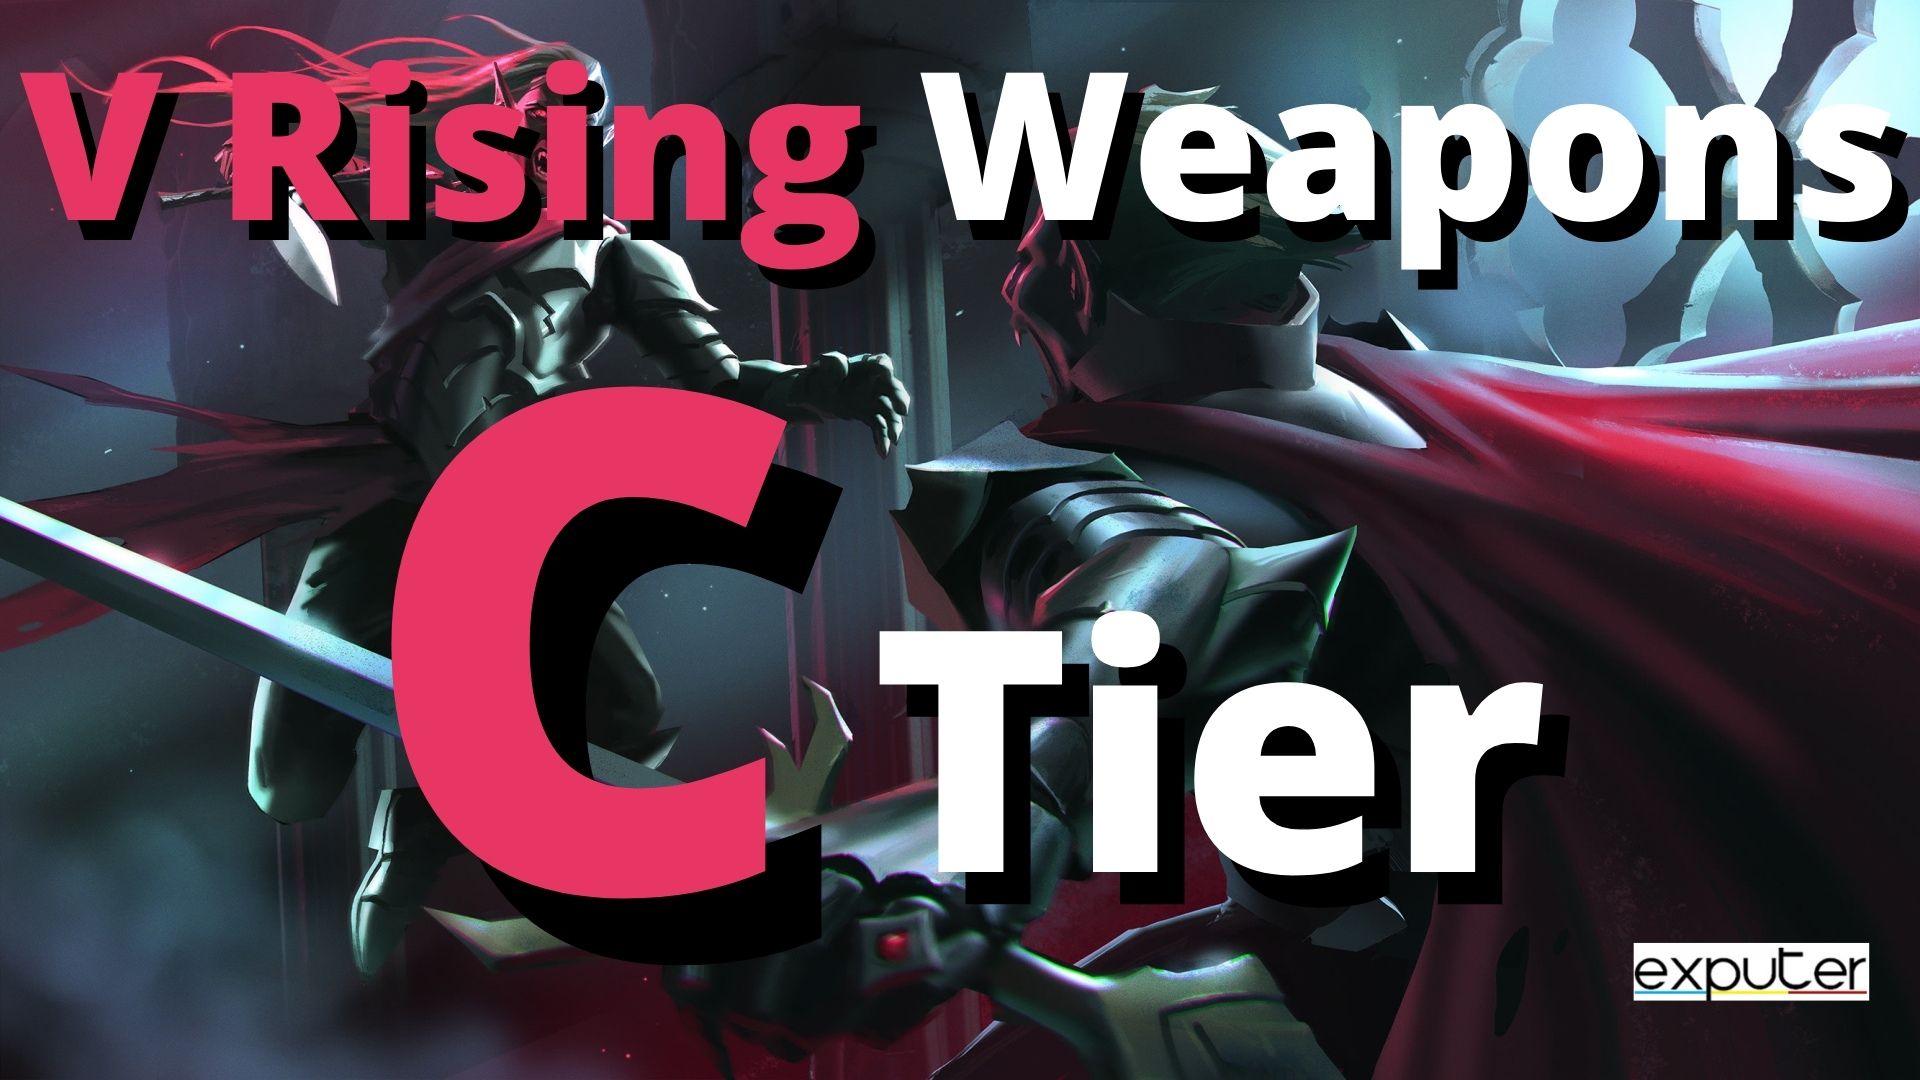 C tier of V Rising Weapons